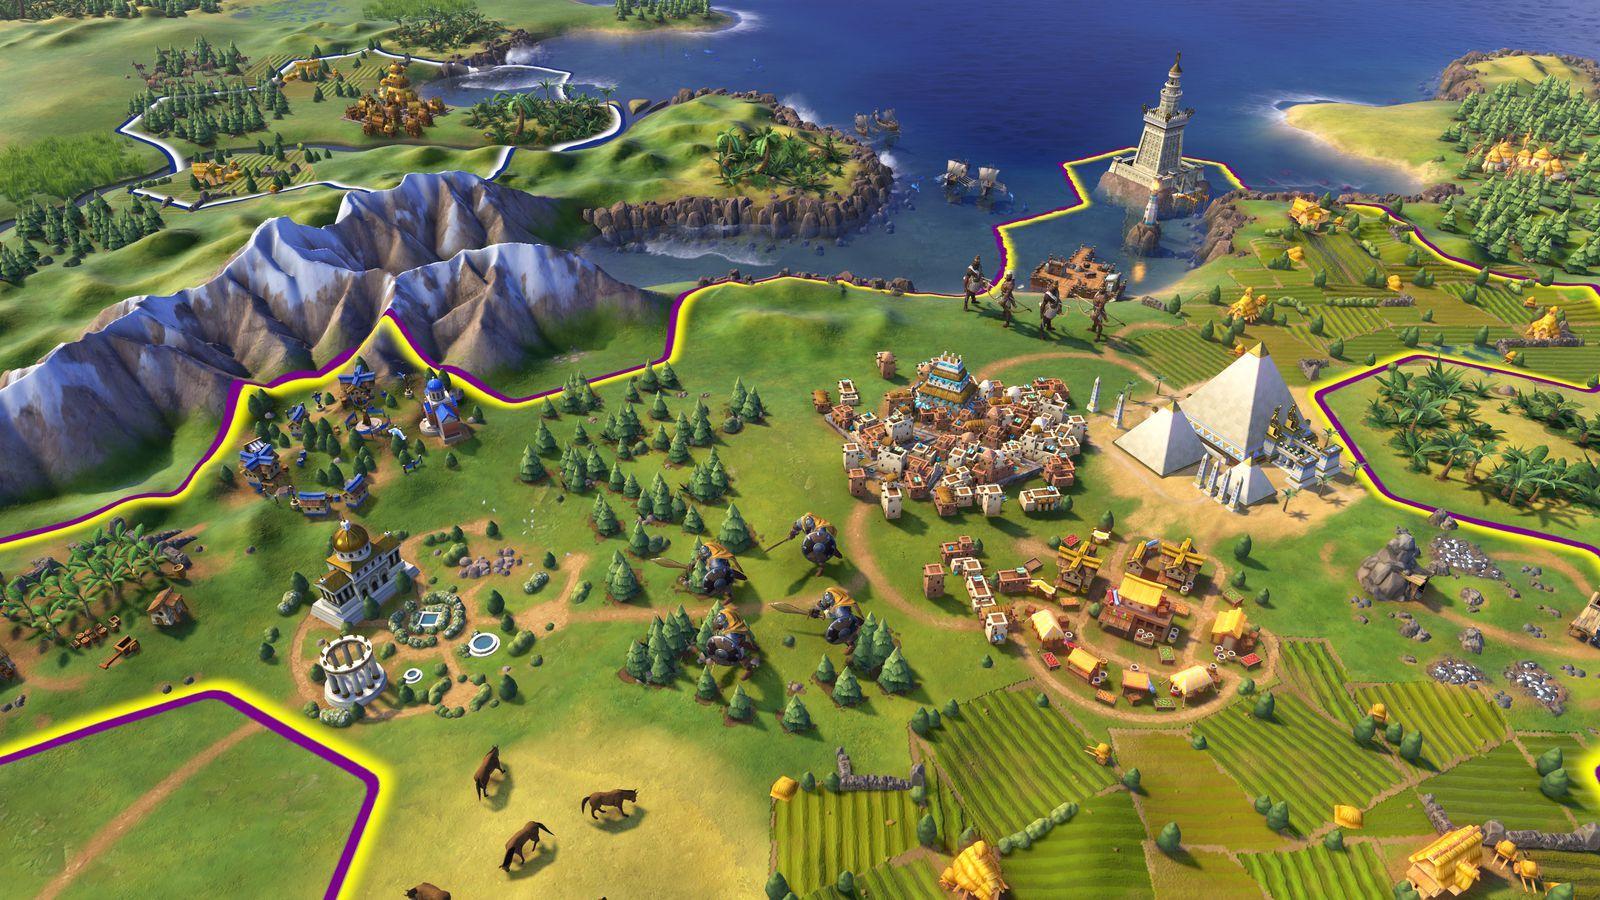 Civilization VI is launching in October